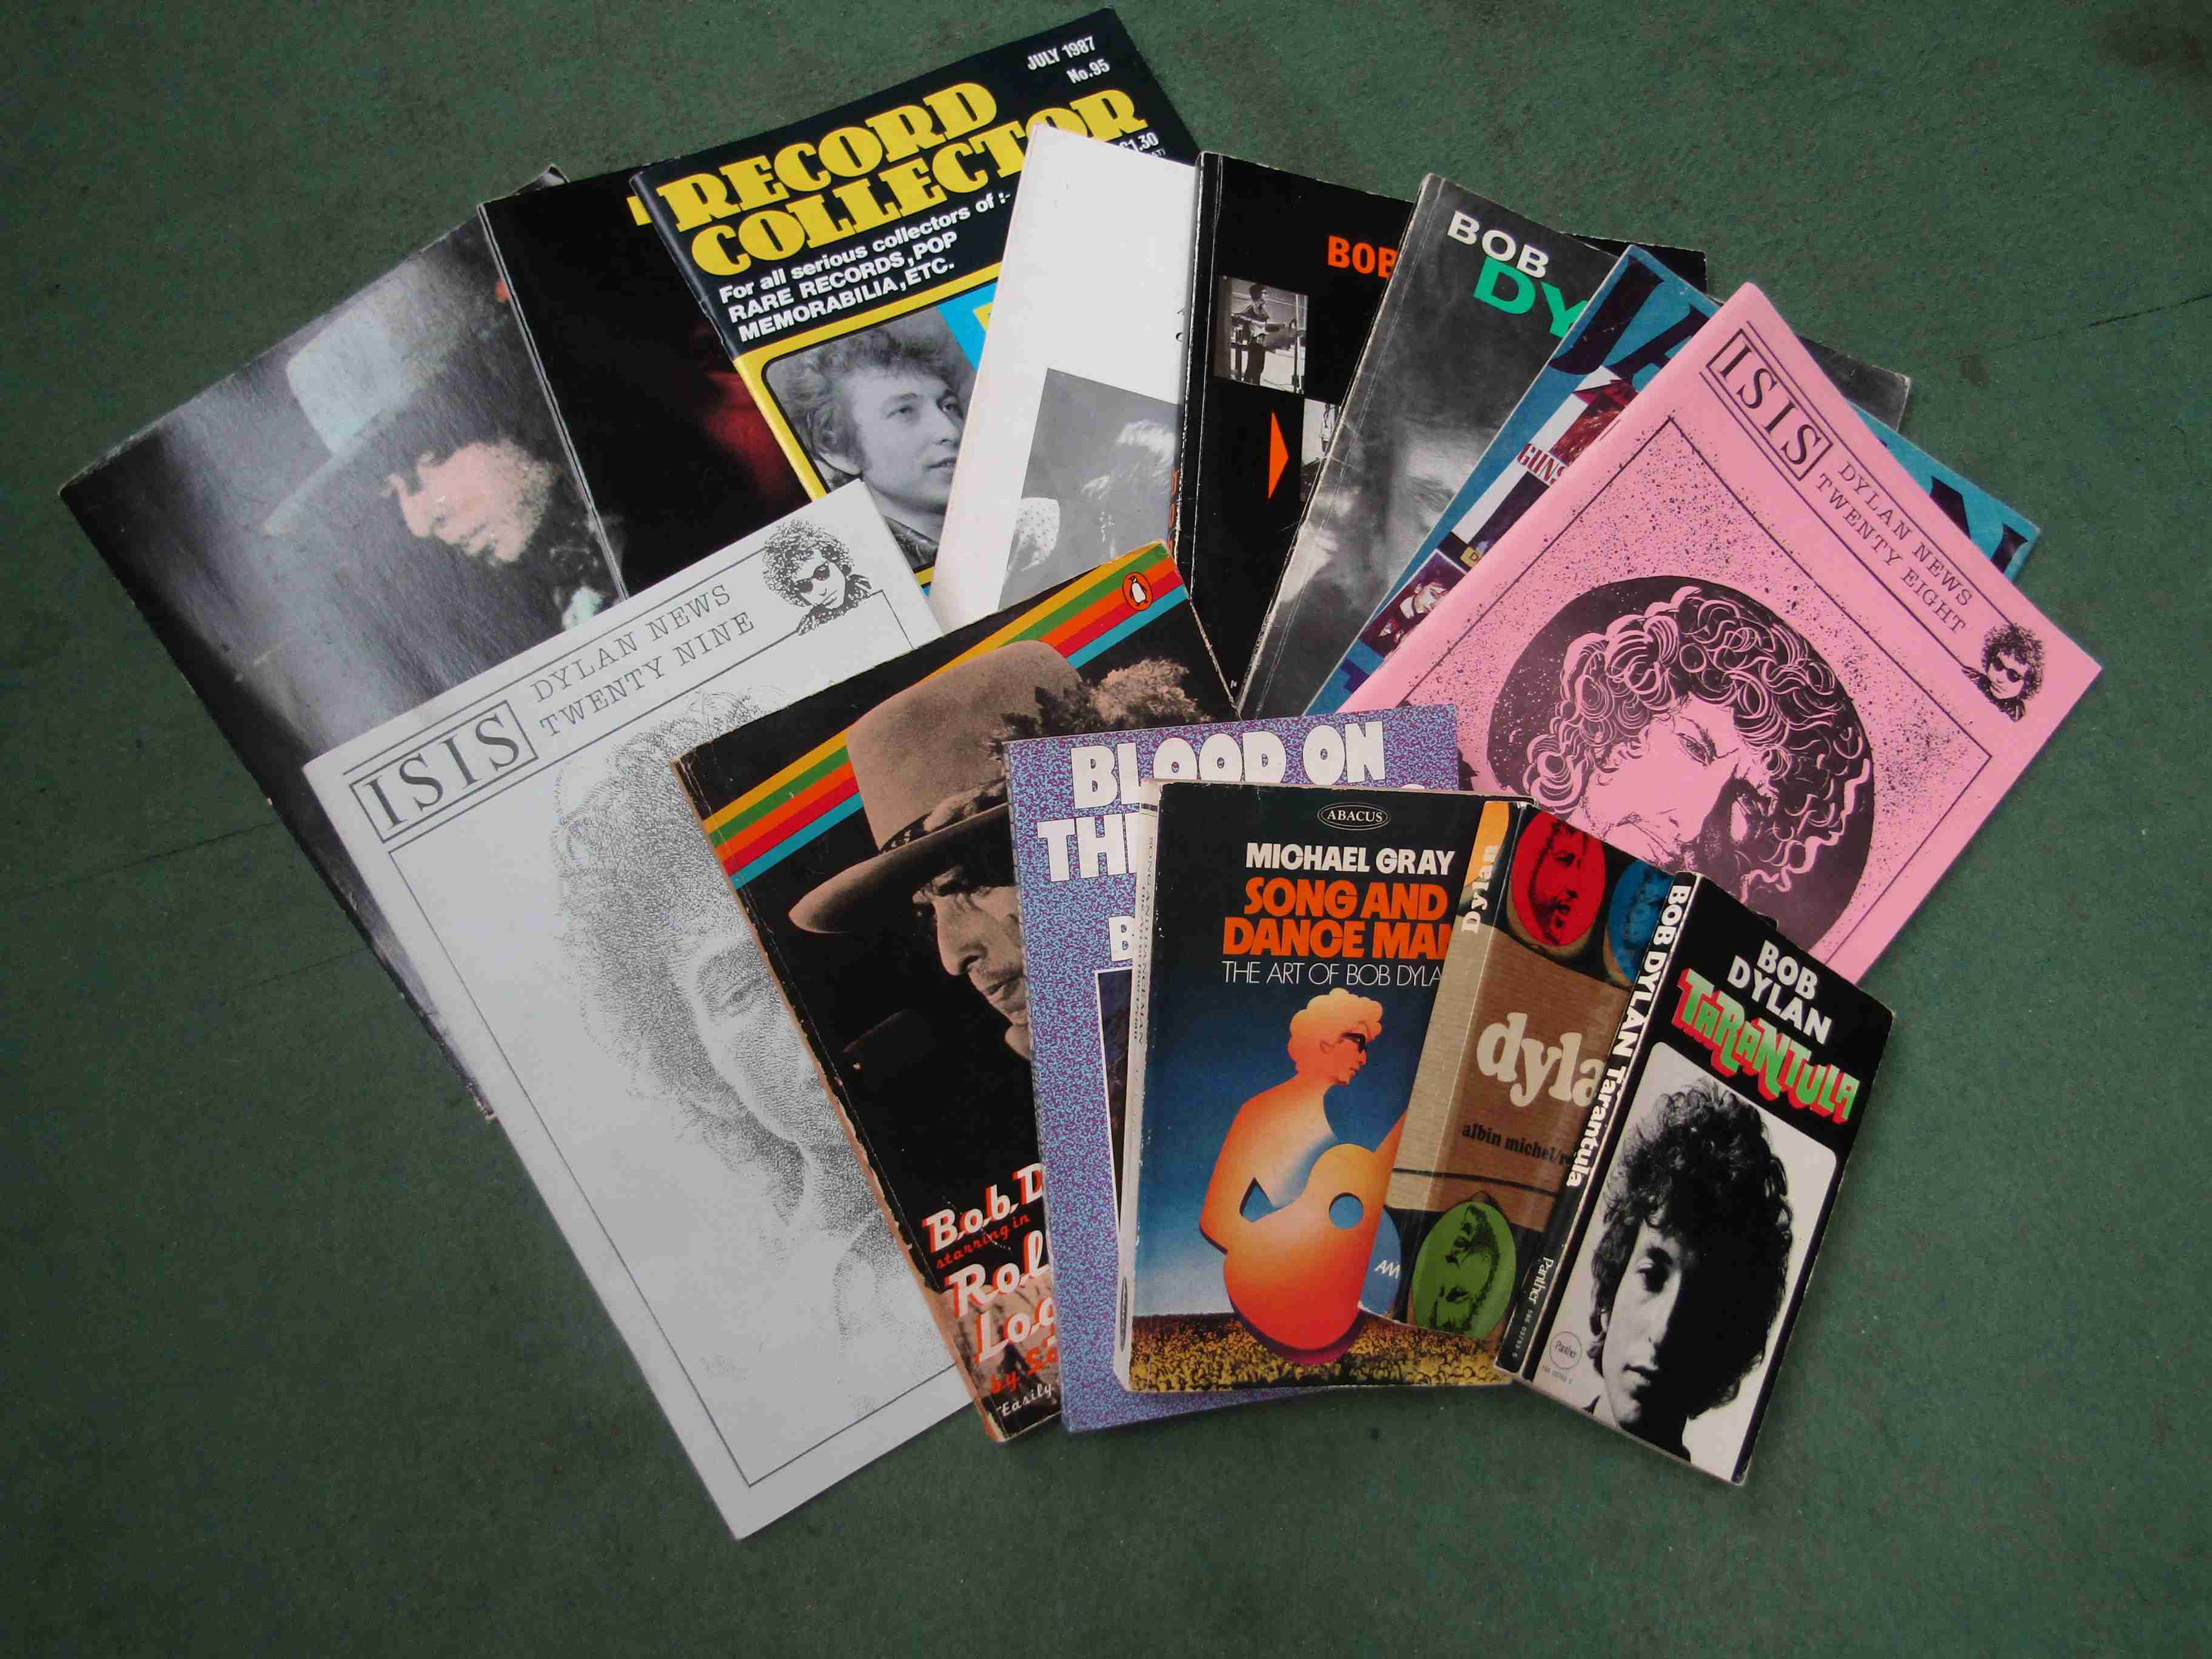 Fourteen assorted Bob Dylan related books and magazines including Oh No! Not Another Bob Dylan Book,